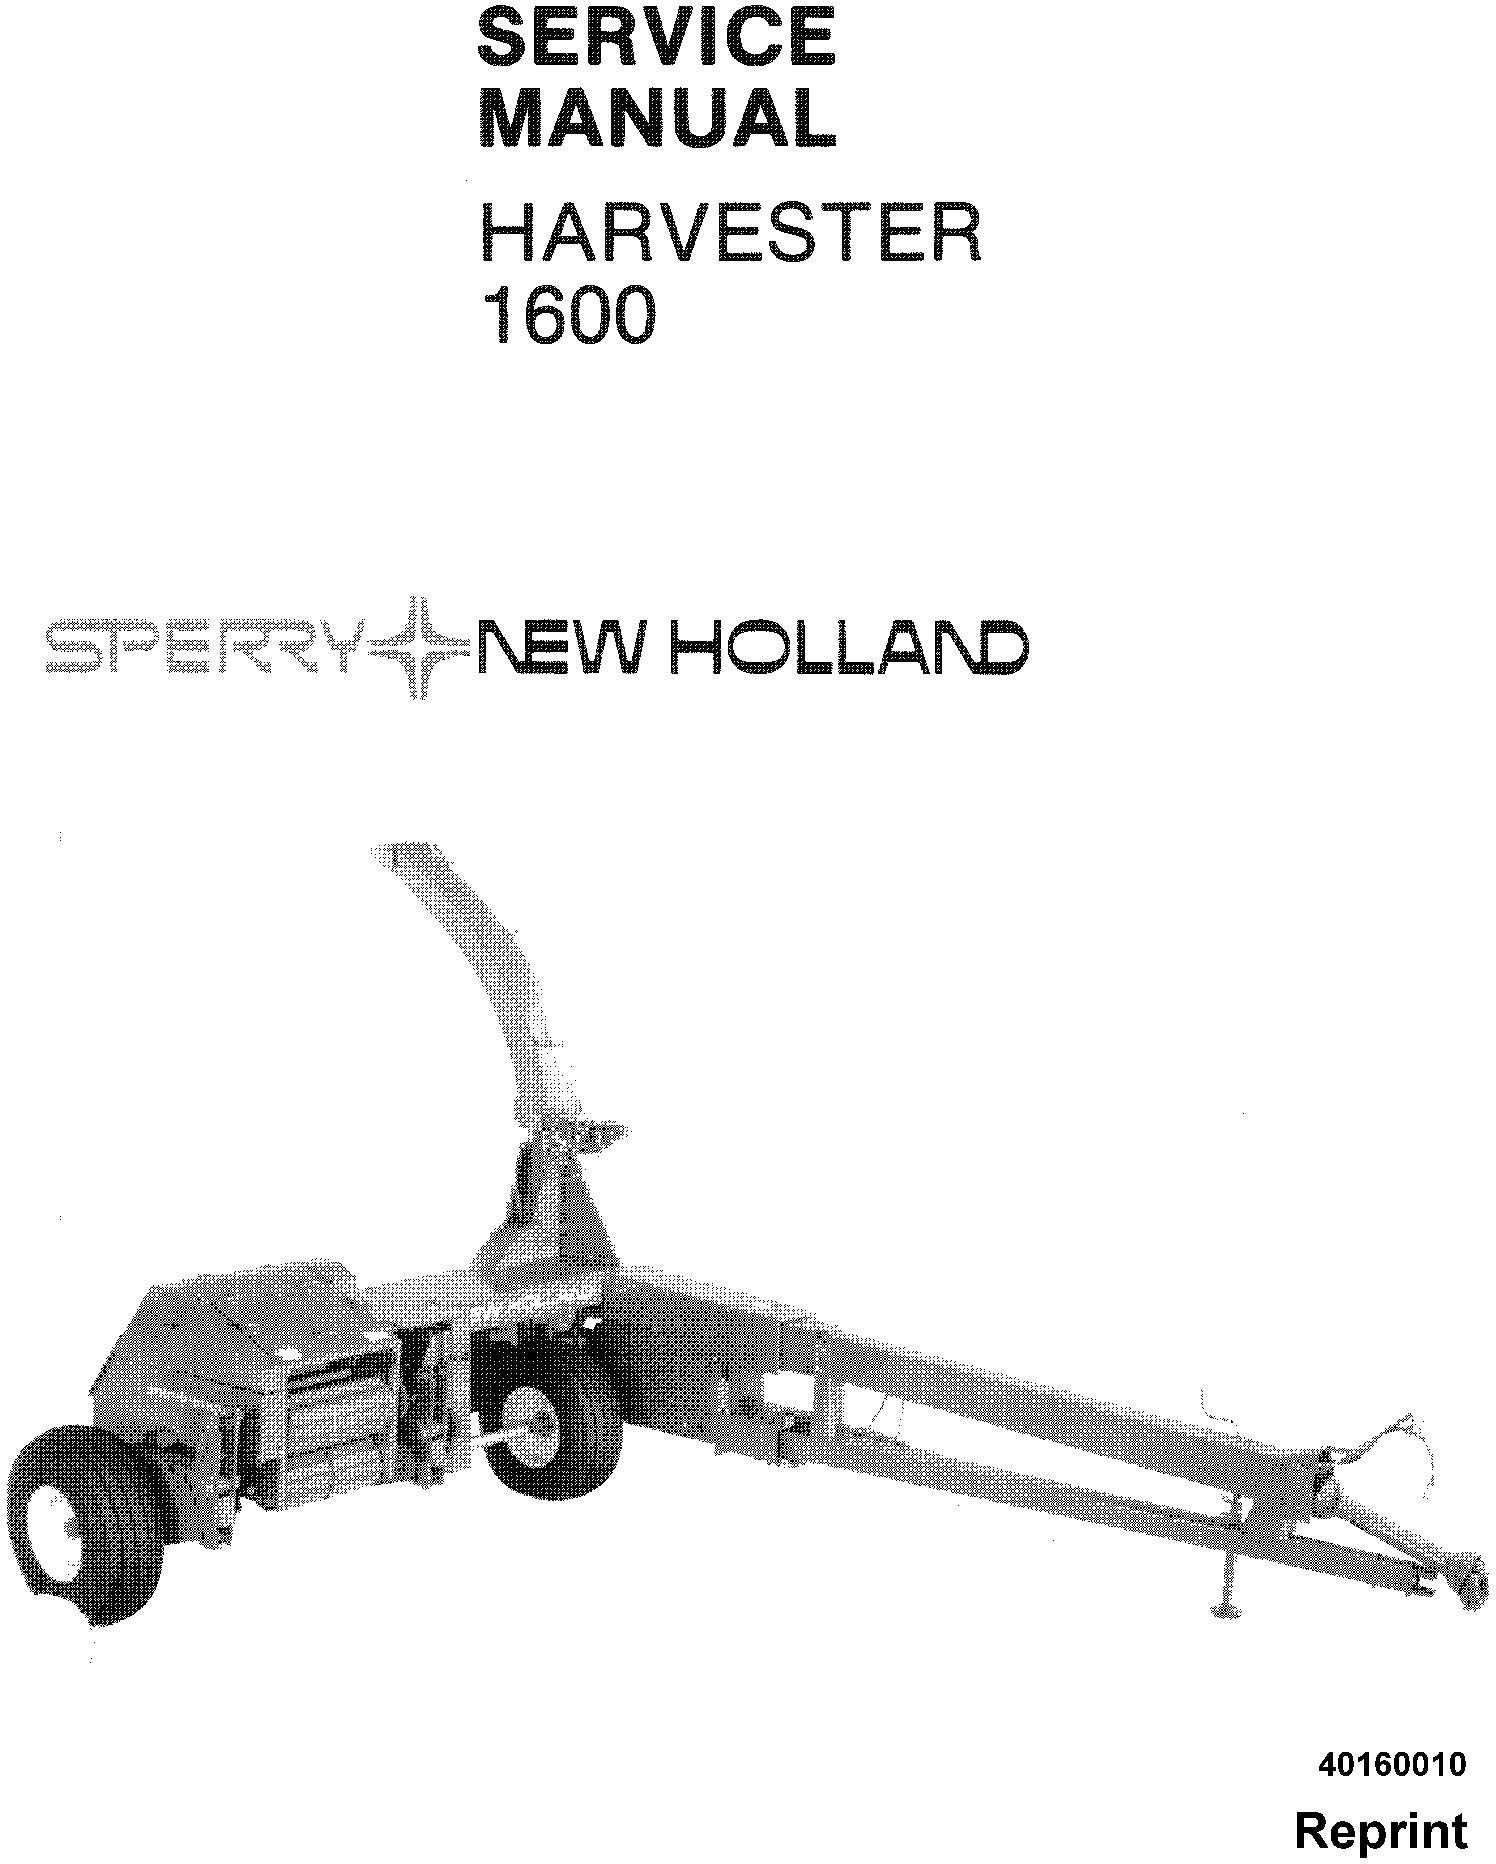 New Holland 1600 Forage Harvester Service Manual - 19362